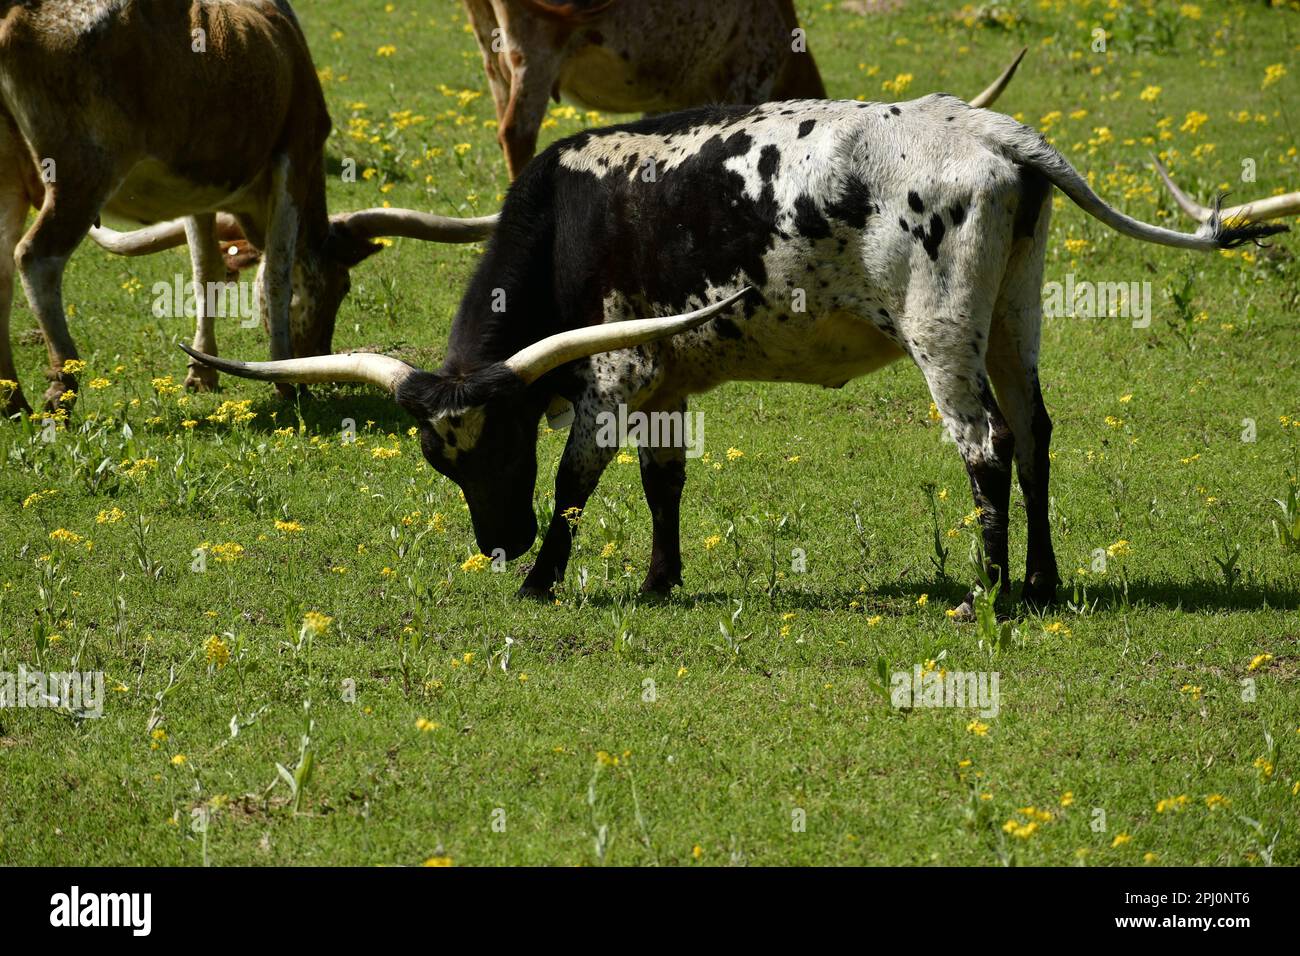 A black and white longhorn cow lifting her head. Stock Photo